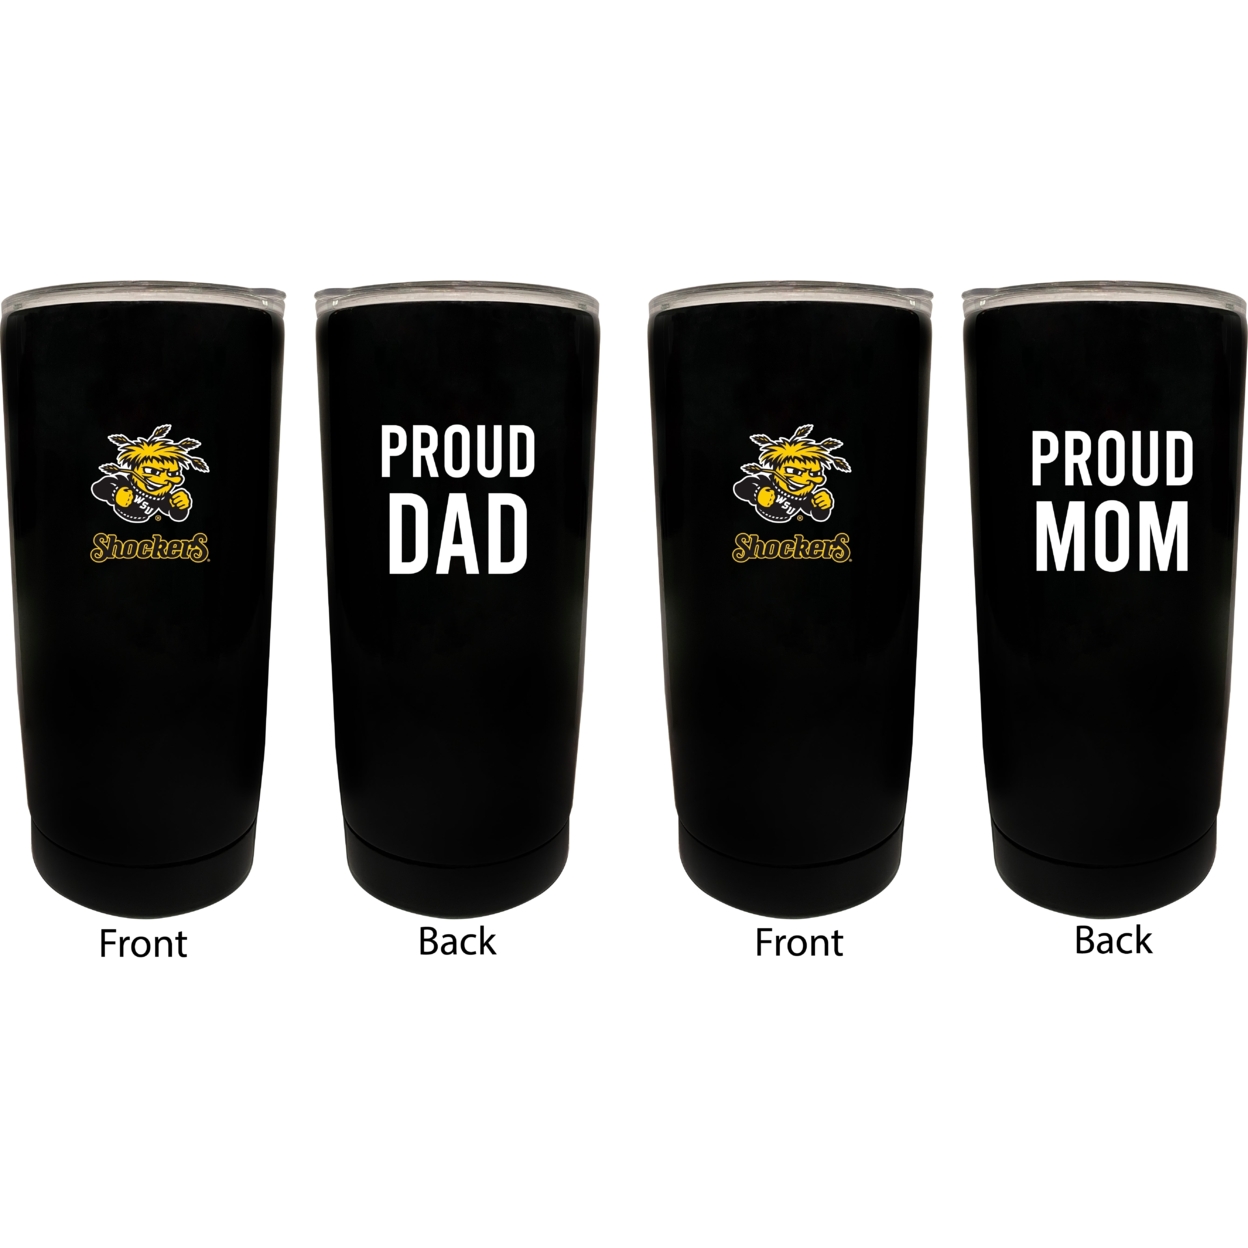 Wichita State Shockers Proud Mom And Dad 16 Oz Insulated Stainless Steel Tumblers 2 Pack Black.